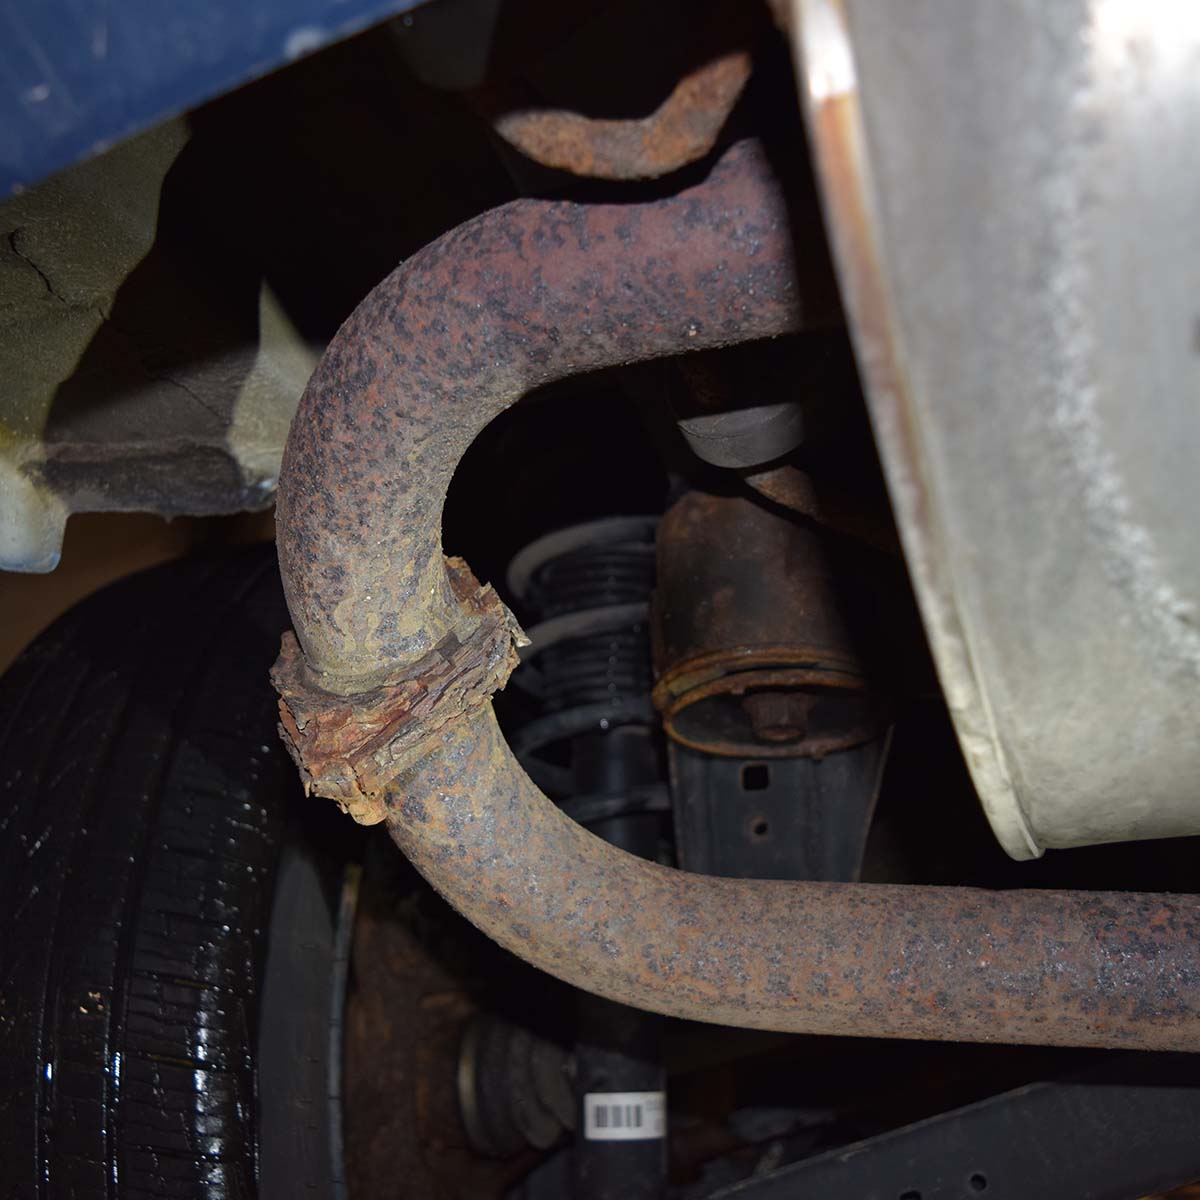 Image of rusty exhaust pipe and muffler